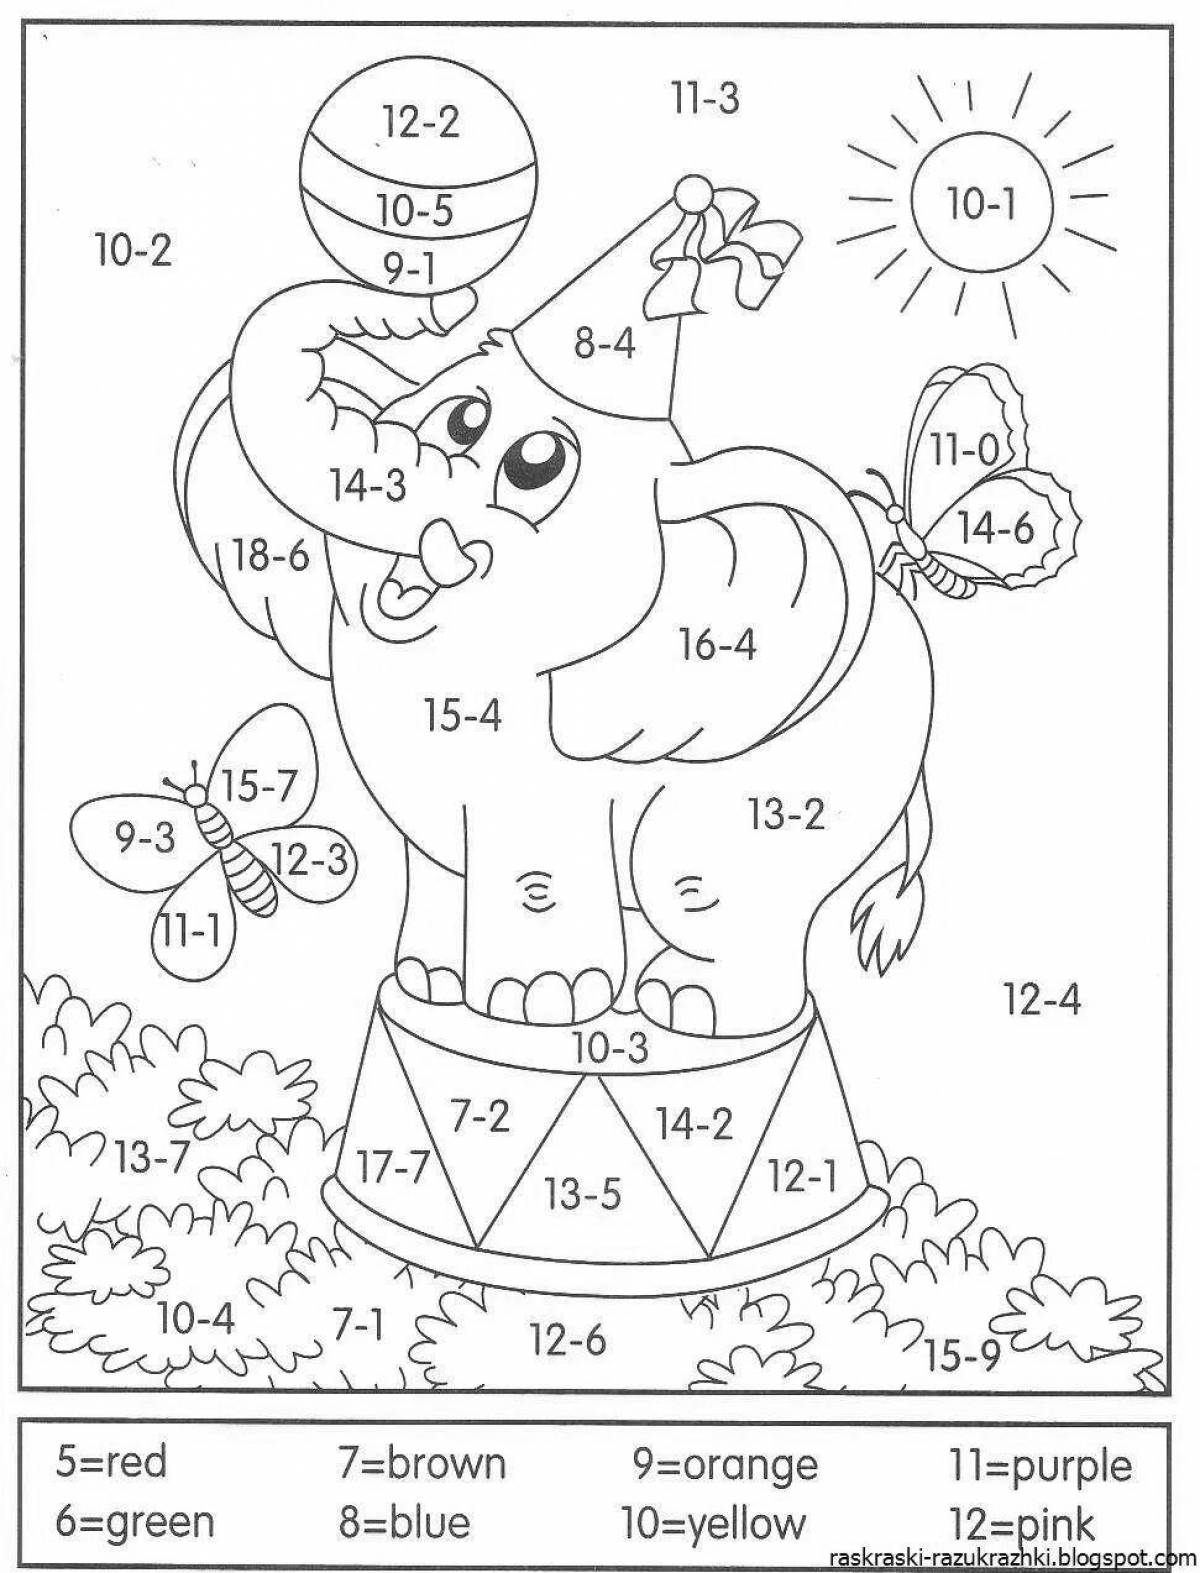 Live math coloring book for kids 6-7 years old